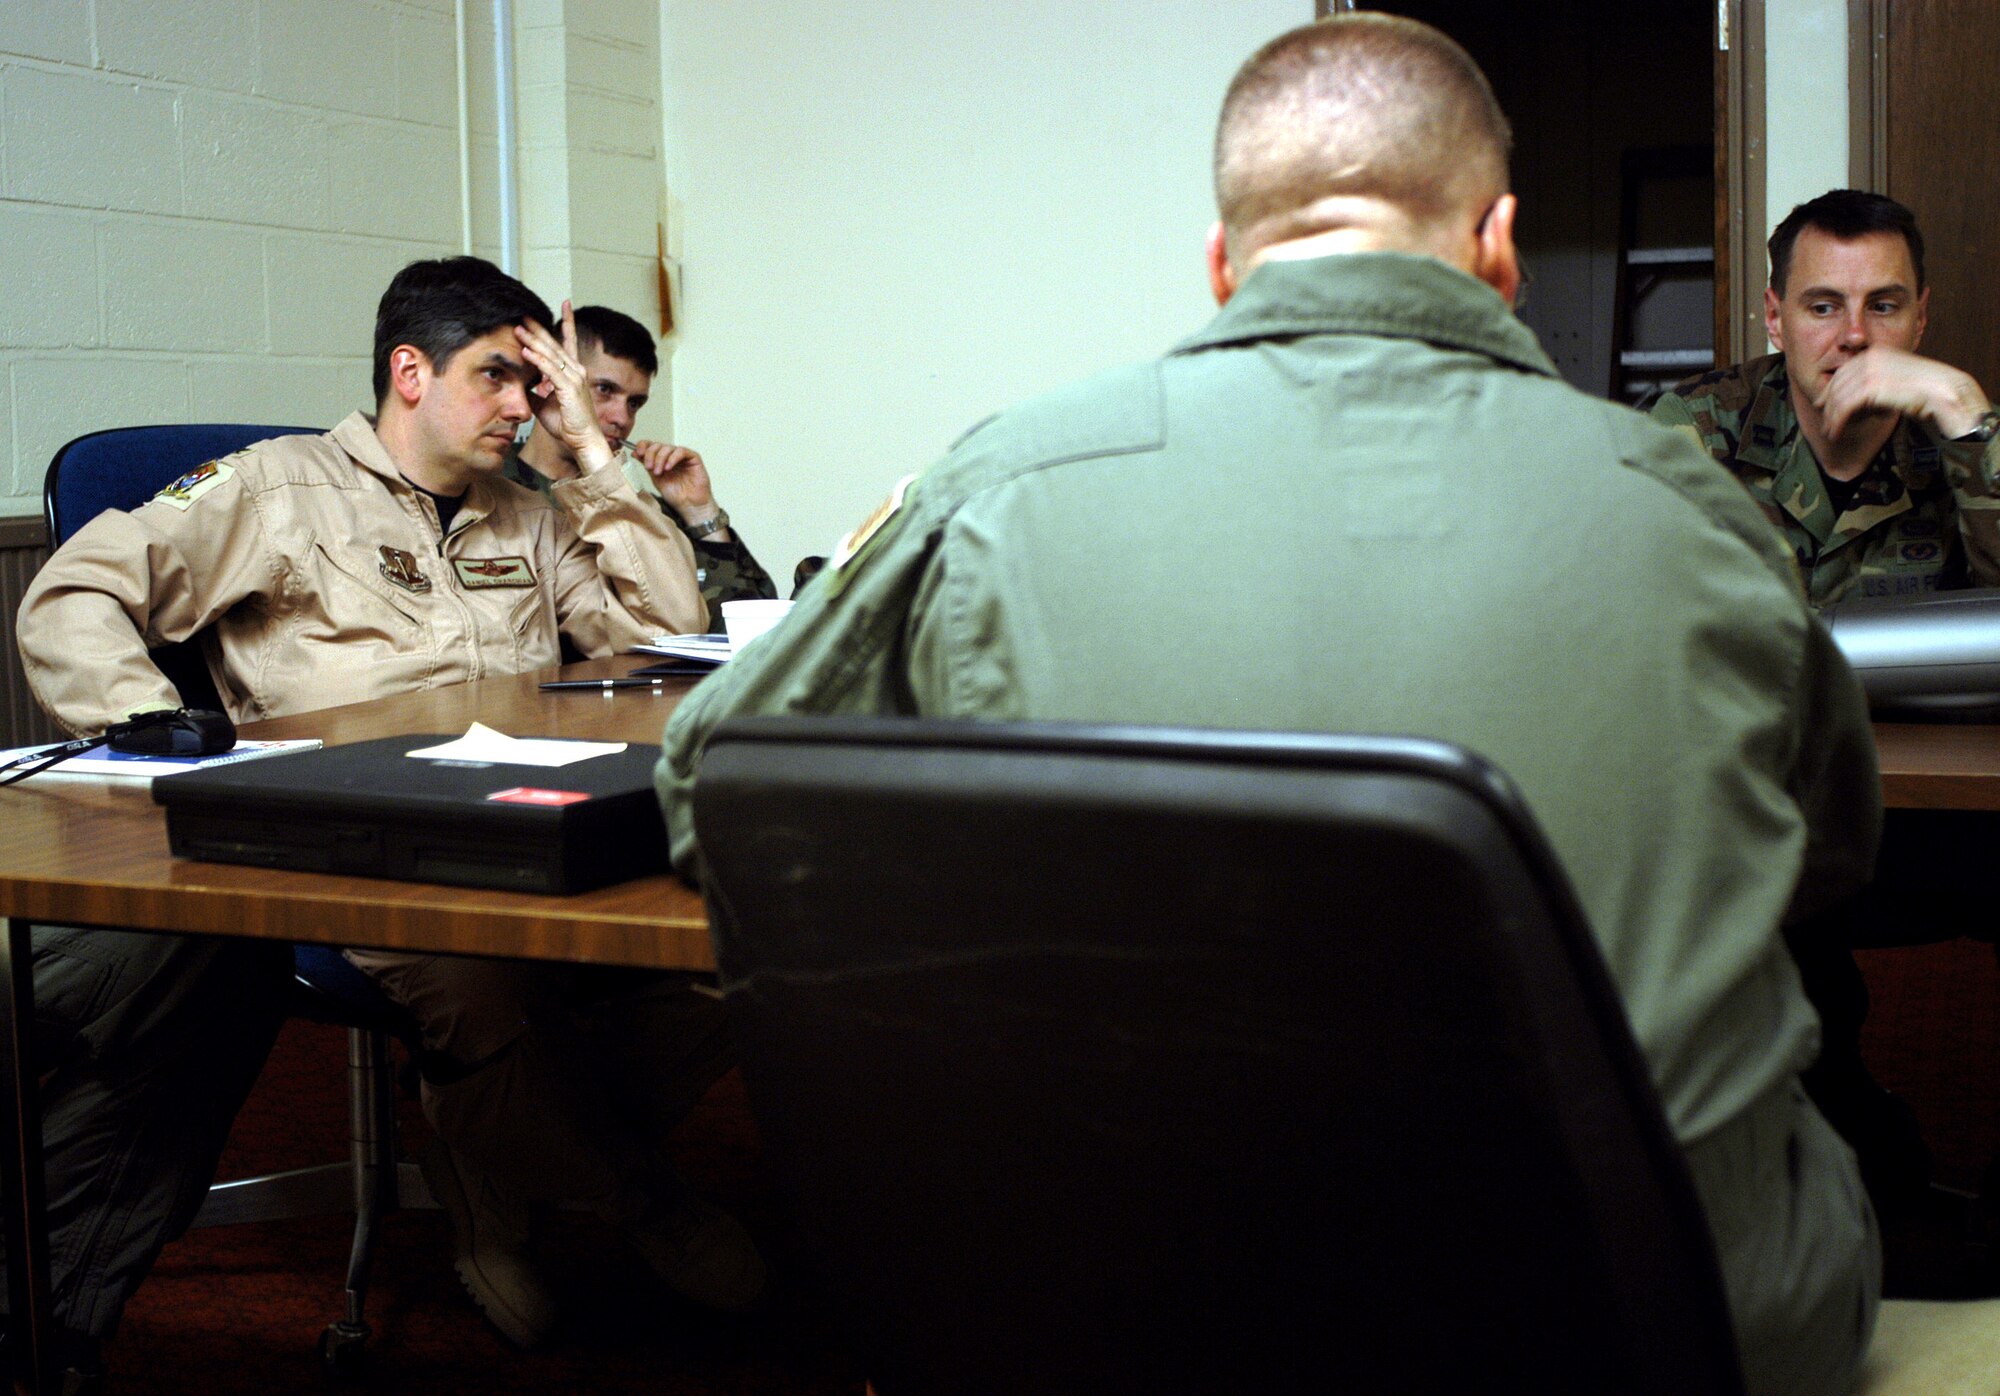 OPERATION IRAQI FREEDOM -- Charchian listens to Lt. Col. Steve talk about a sensitive aircrew issue. (U.S. Air Force photo by Tech. Sgt. Jason Tudor)